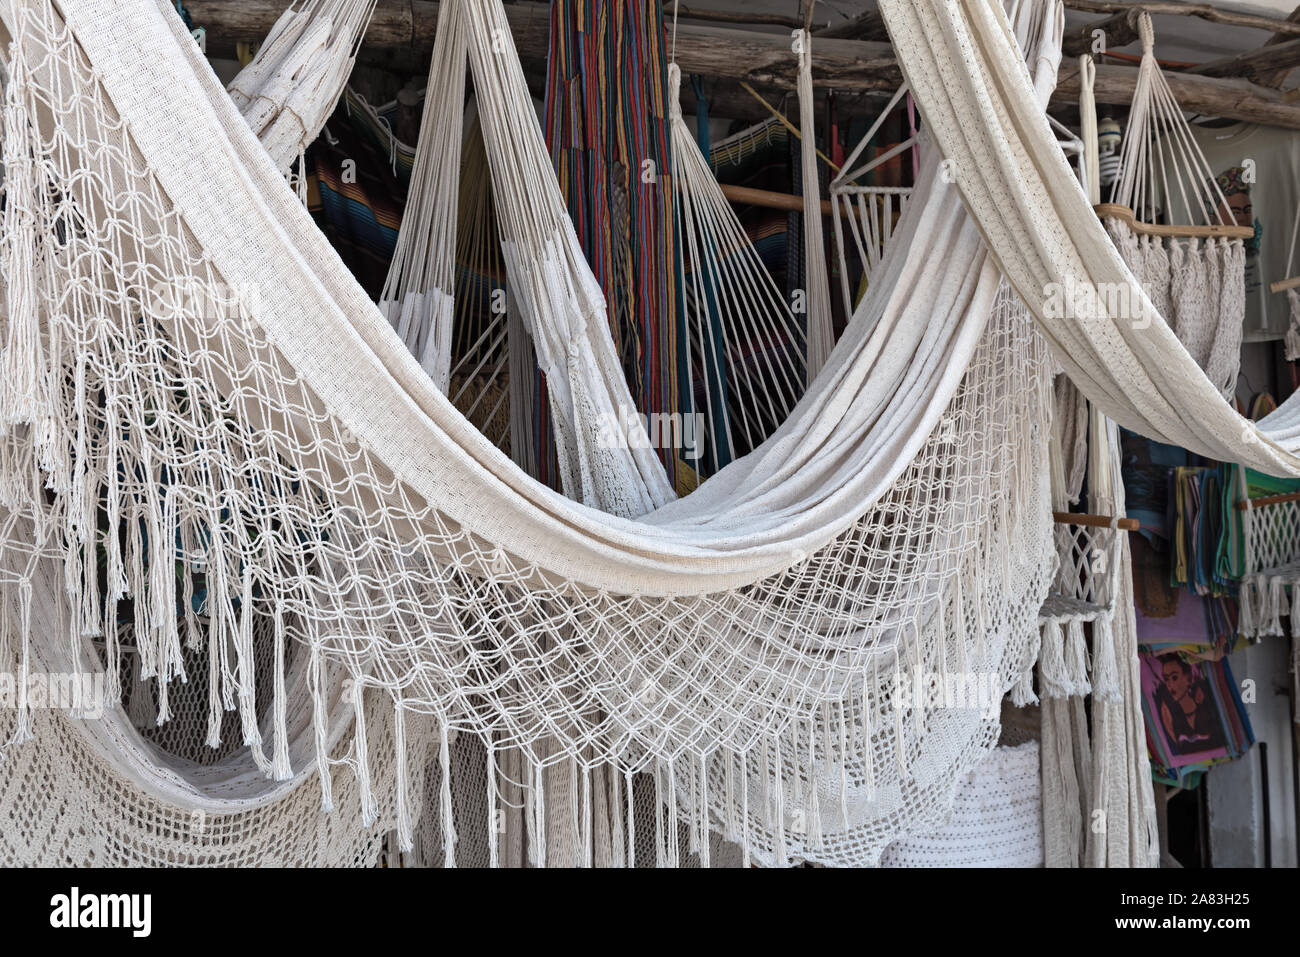 hammocks in a gift shop in the city center of tulum mexico Stock Photo